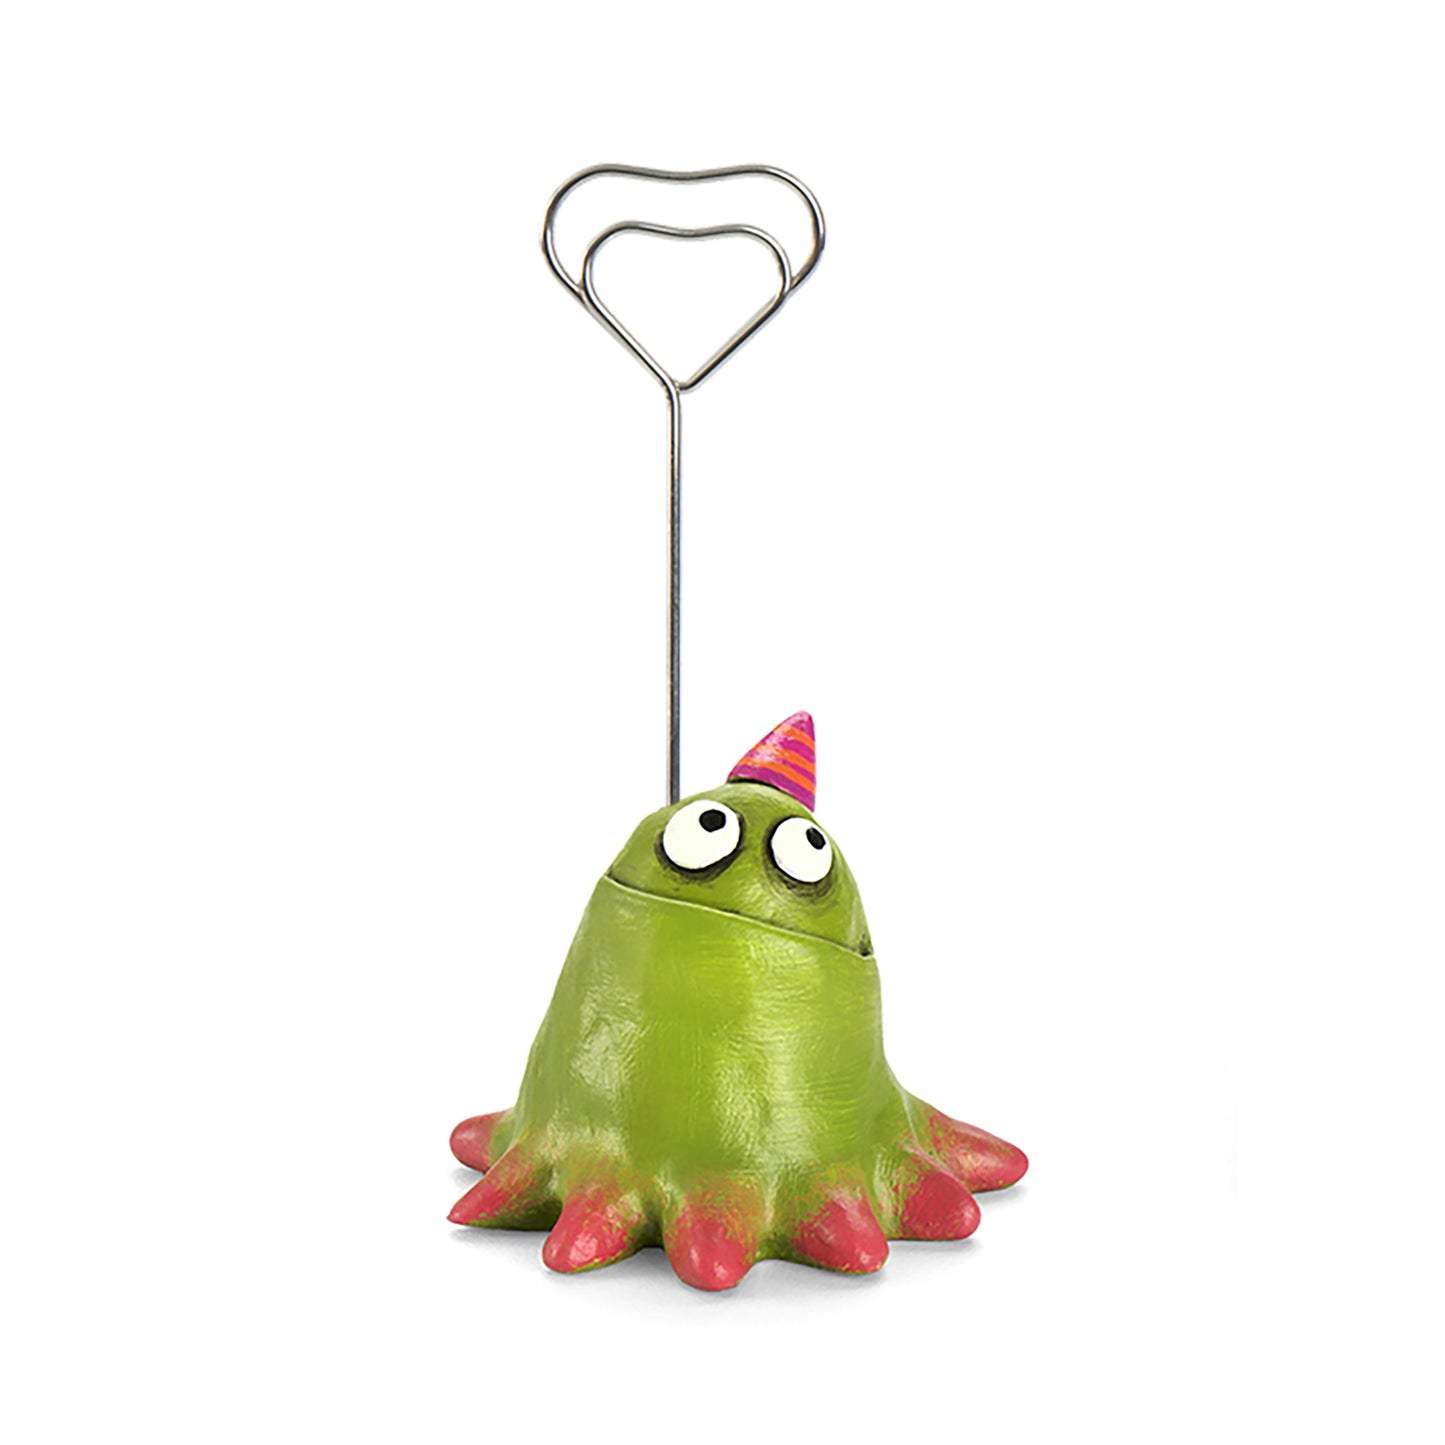 Shindig the Party Blob - Comes with 2 greeting cards!